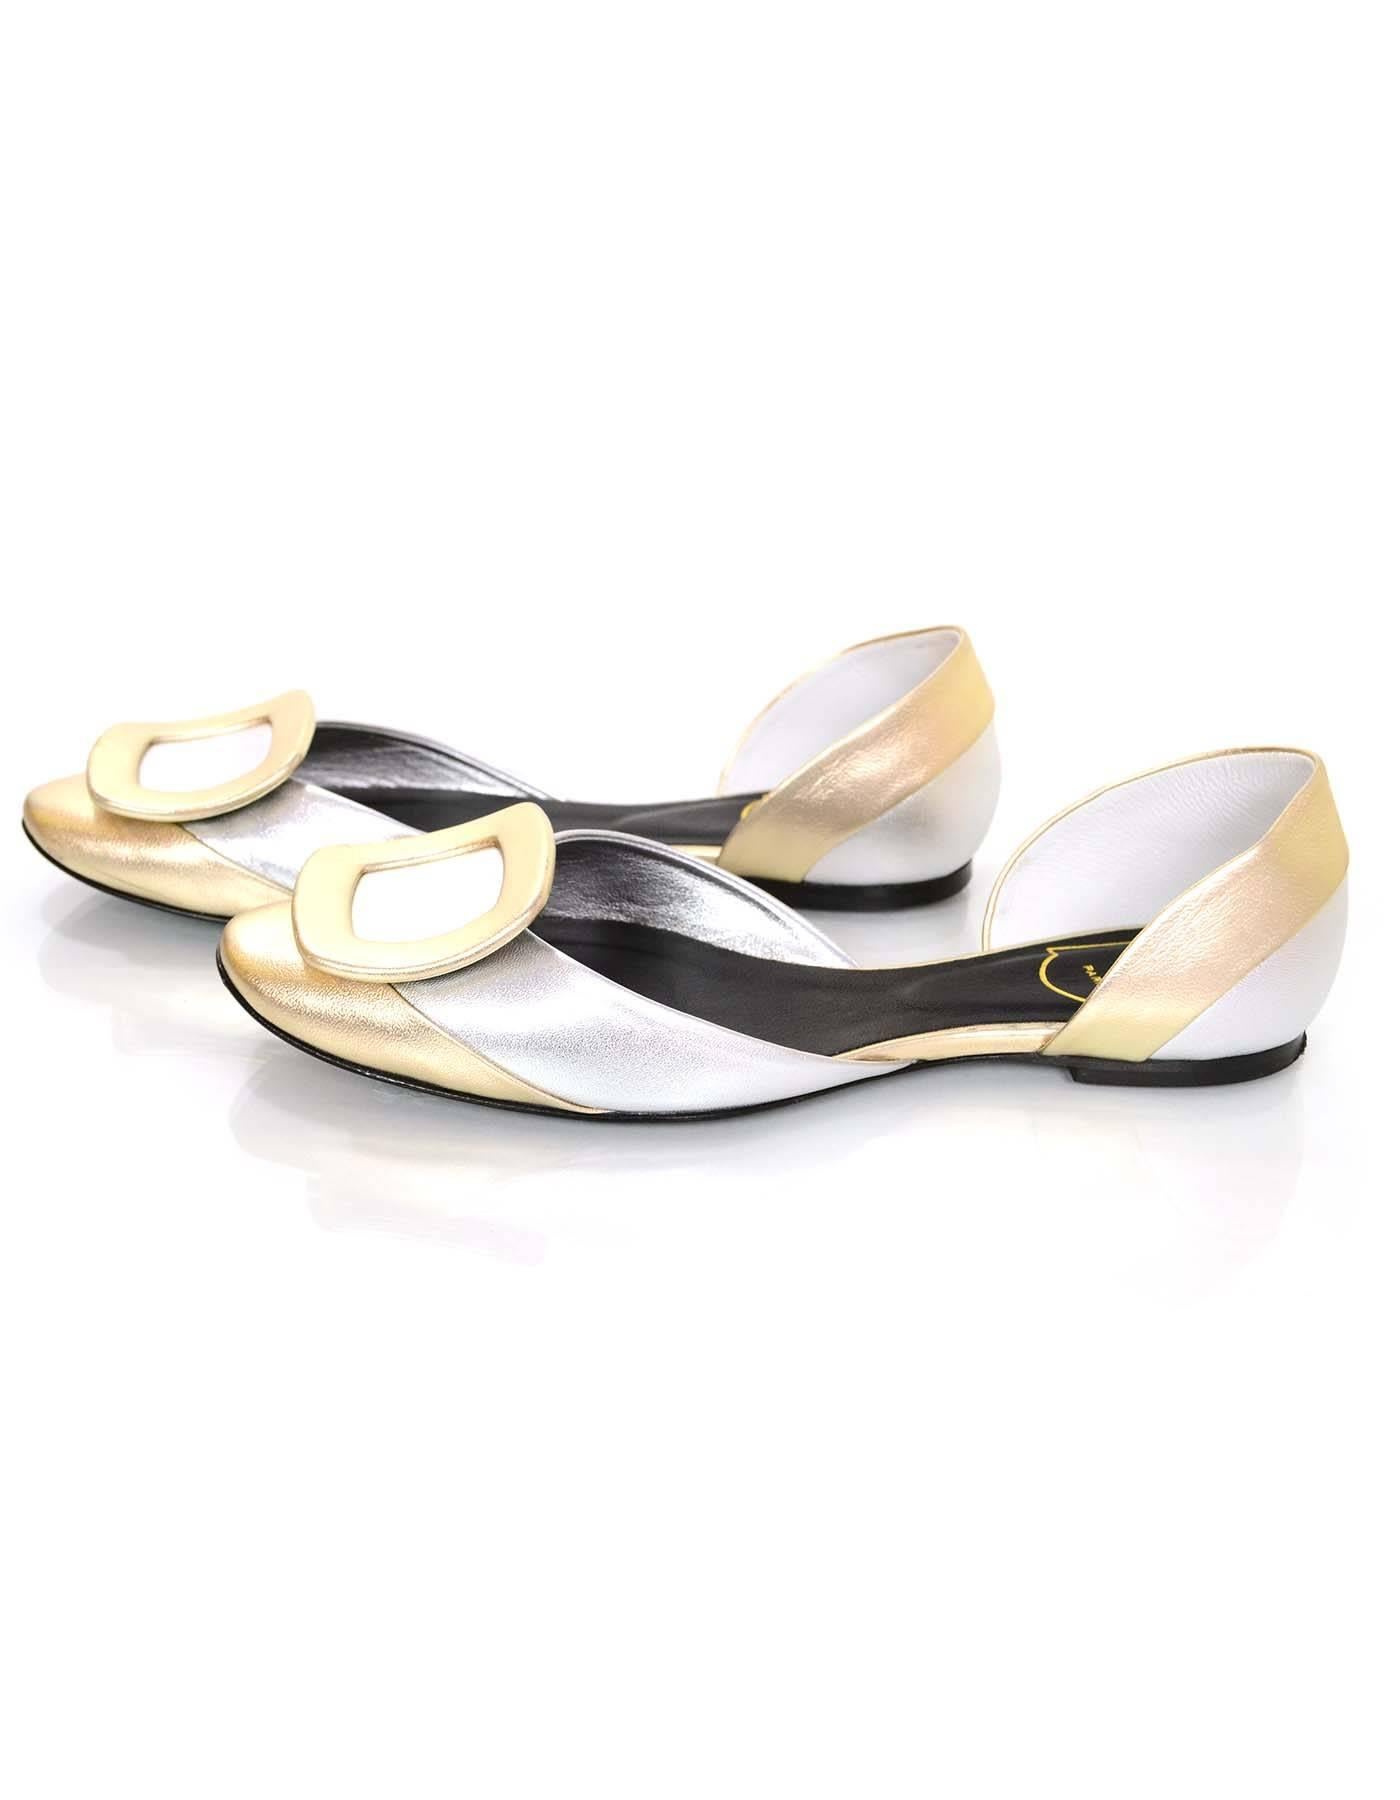 Roger Vivier Chips Pilgram Leather d'Orsay Flats Sz 37

Made In: Italy
Color: Gold and silver
Materials: Leather
Closure/Opening: Slide on
Sole Stamp: RV Made in Italy Women's size 37
Overall Condition: Excellent pre-owned condition with the